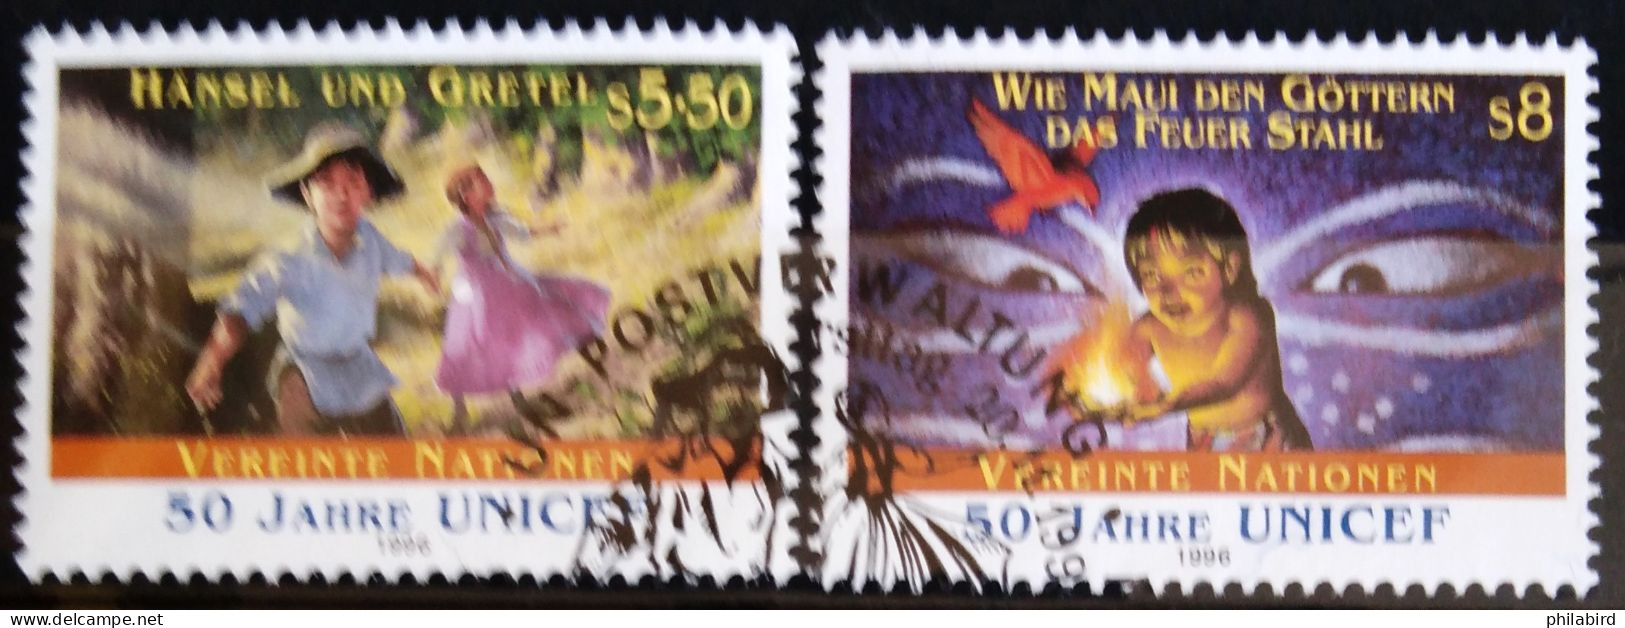 NATIONS-UNIS - VIENNE                          N° 238/239                       OBLITERE - Used Stamps